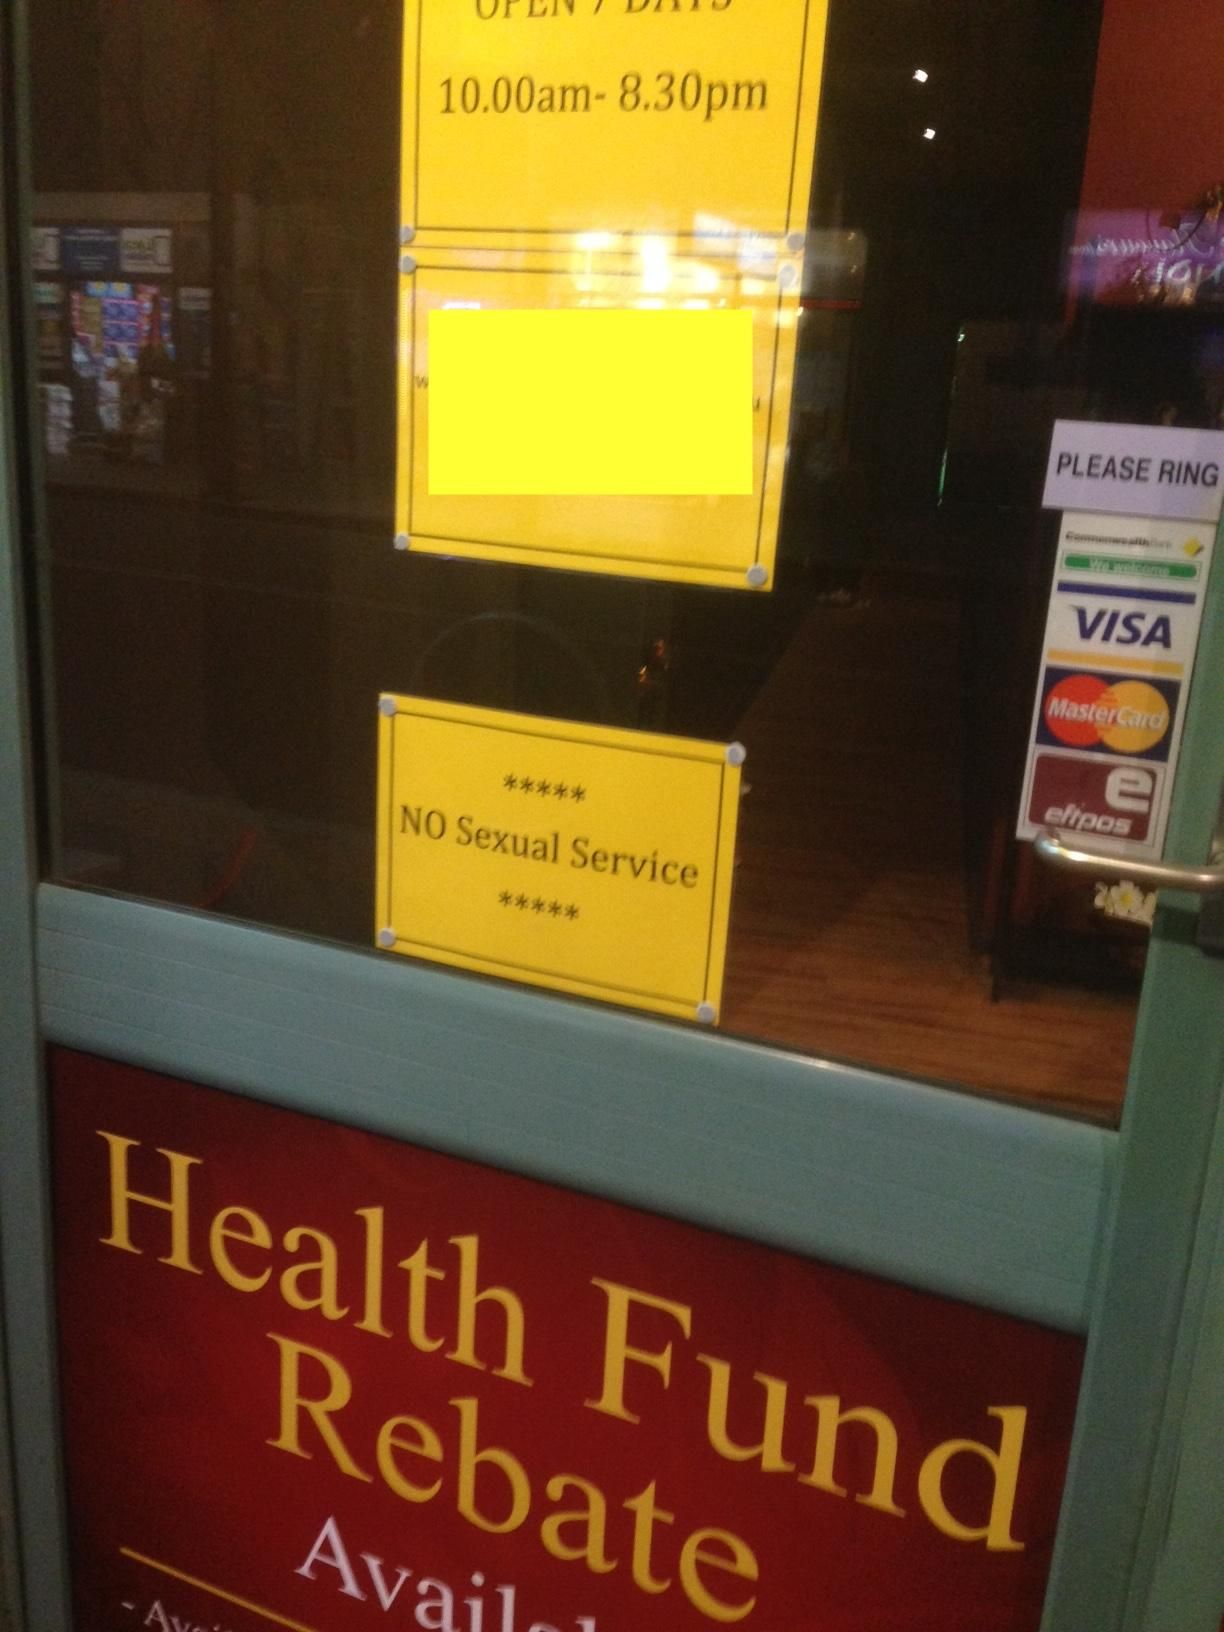 A Thai massage place in my area opened 3 days ago and already had to put this sign in the window